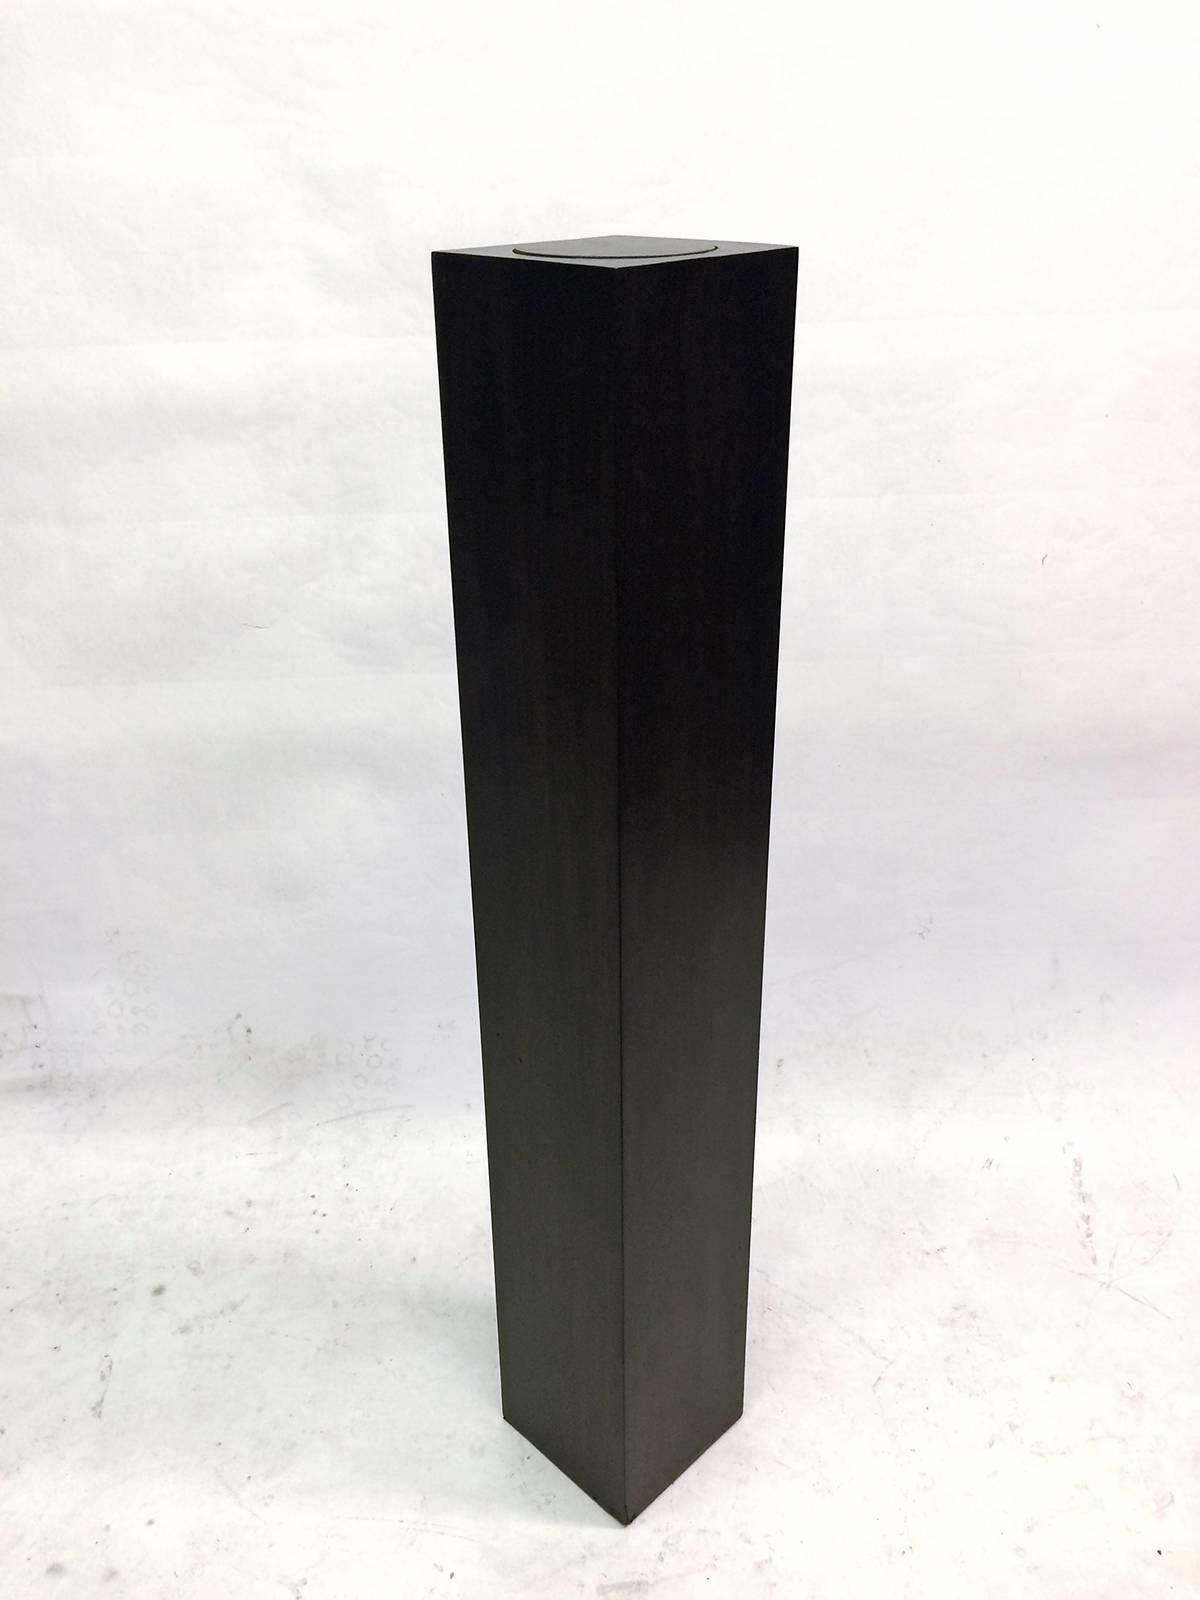 Rare pedestal finished in dark ebony stain with an inset swivel top. Would allow your sculpture to rotate and show every side.